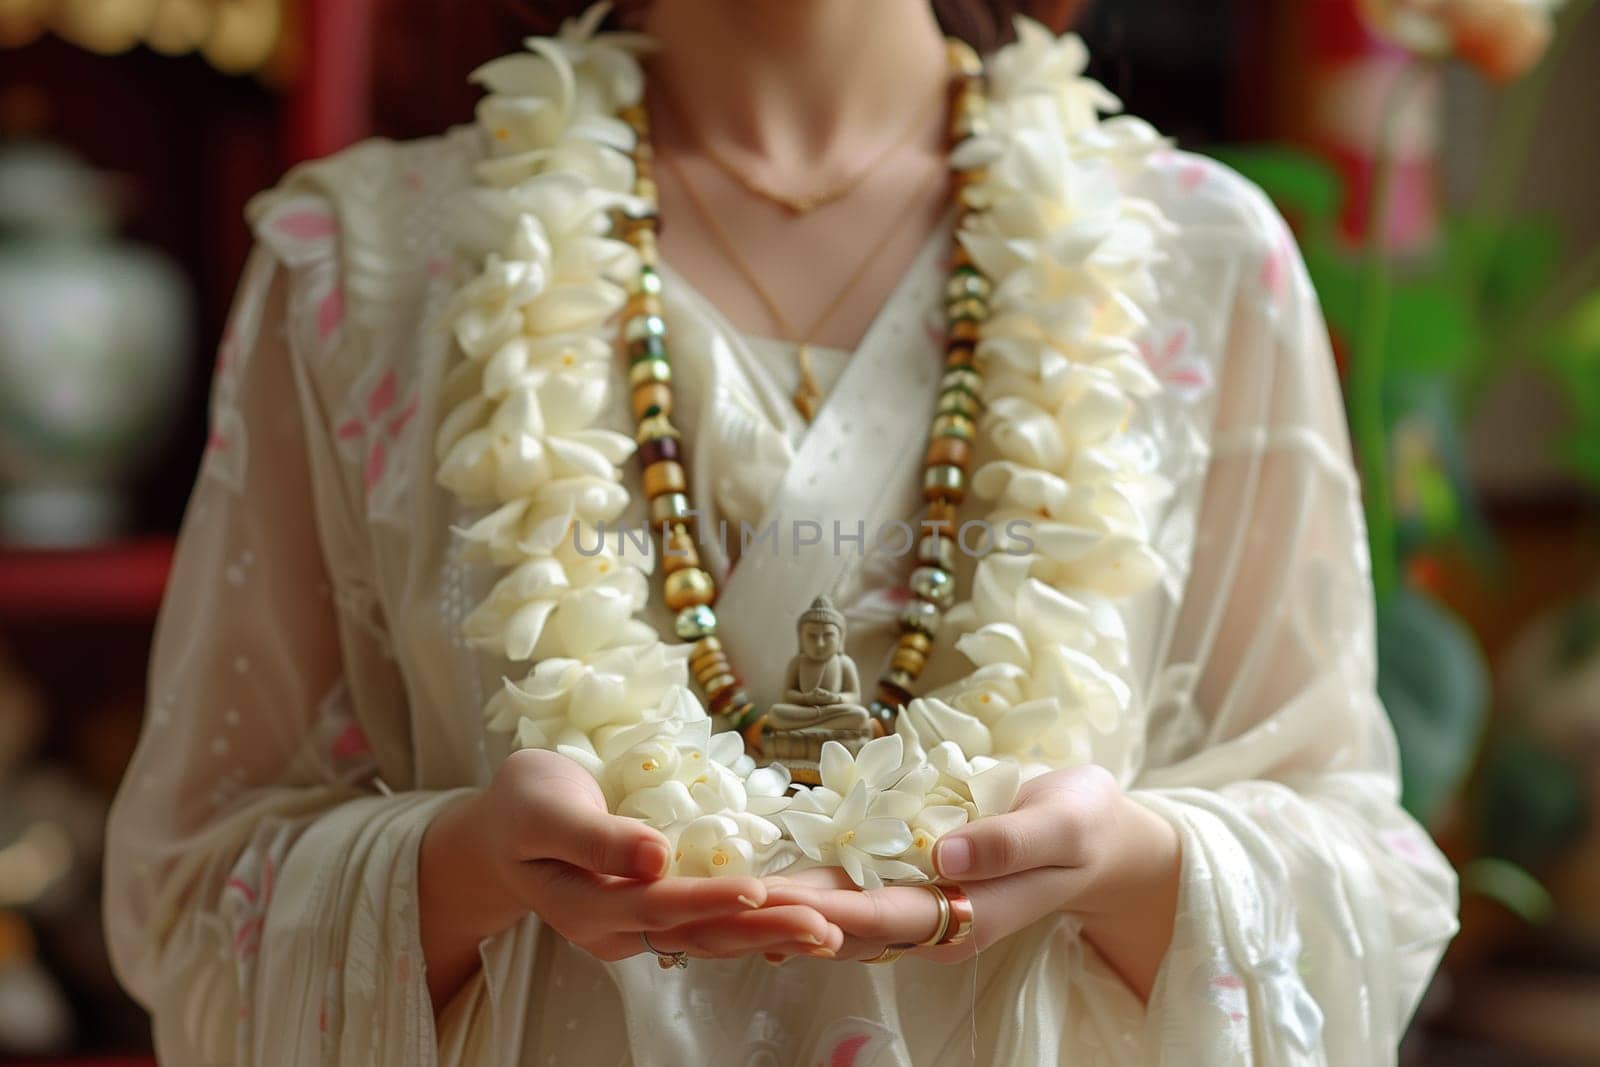 A woman dressed in white holding a necklace in her hands.